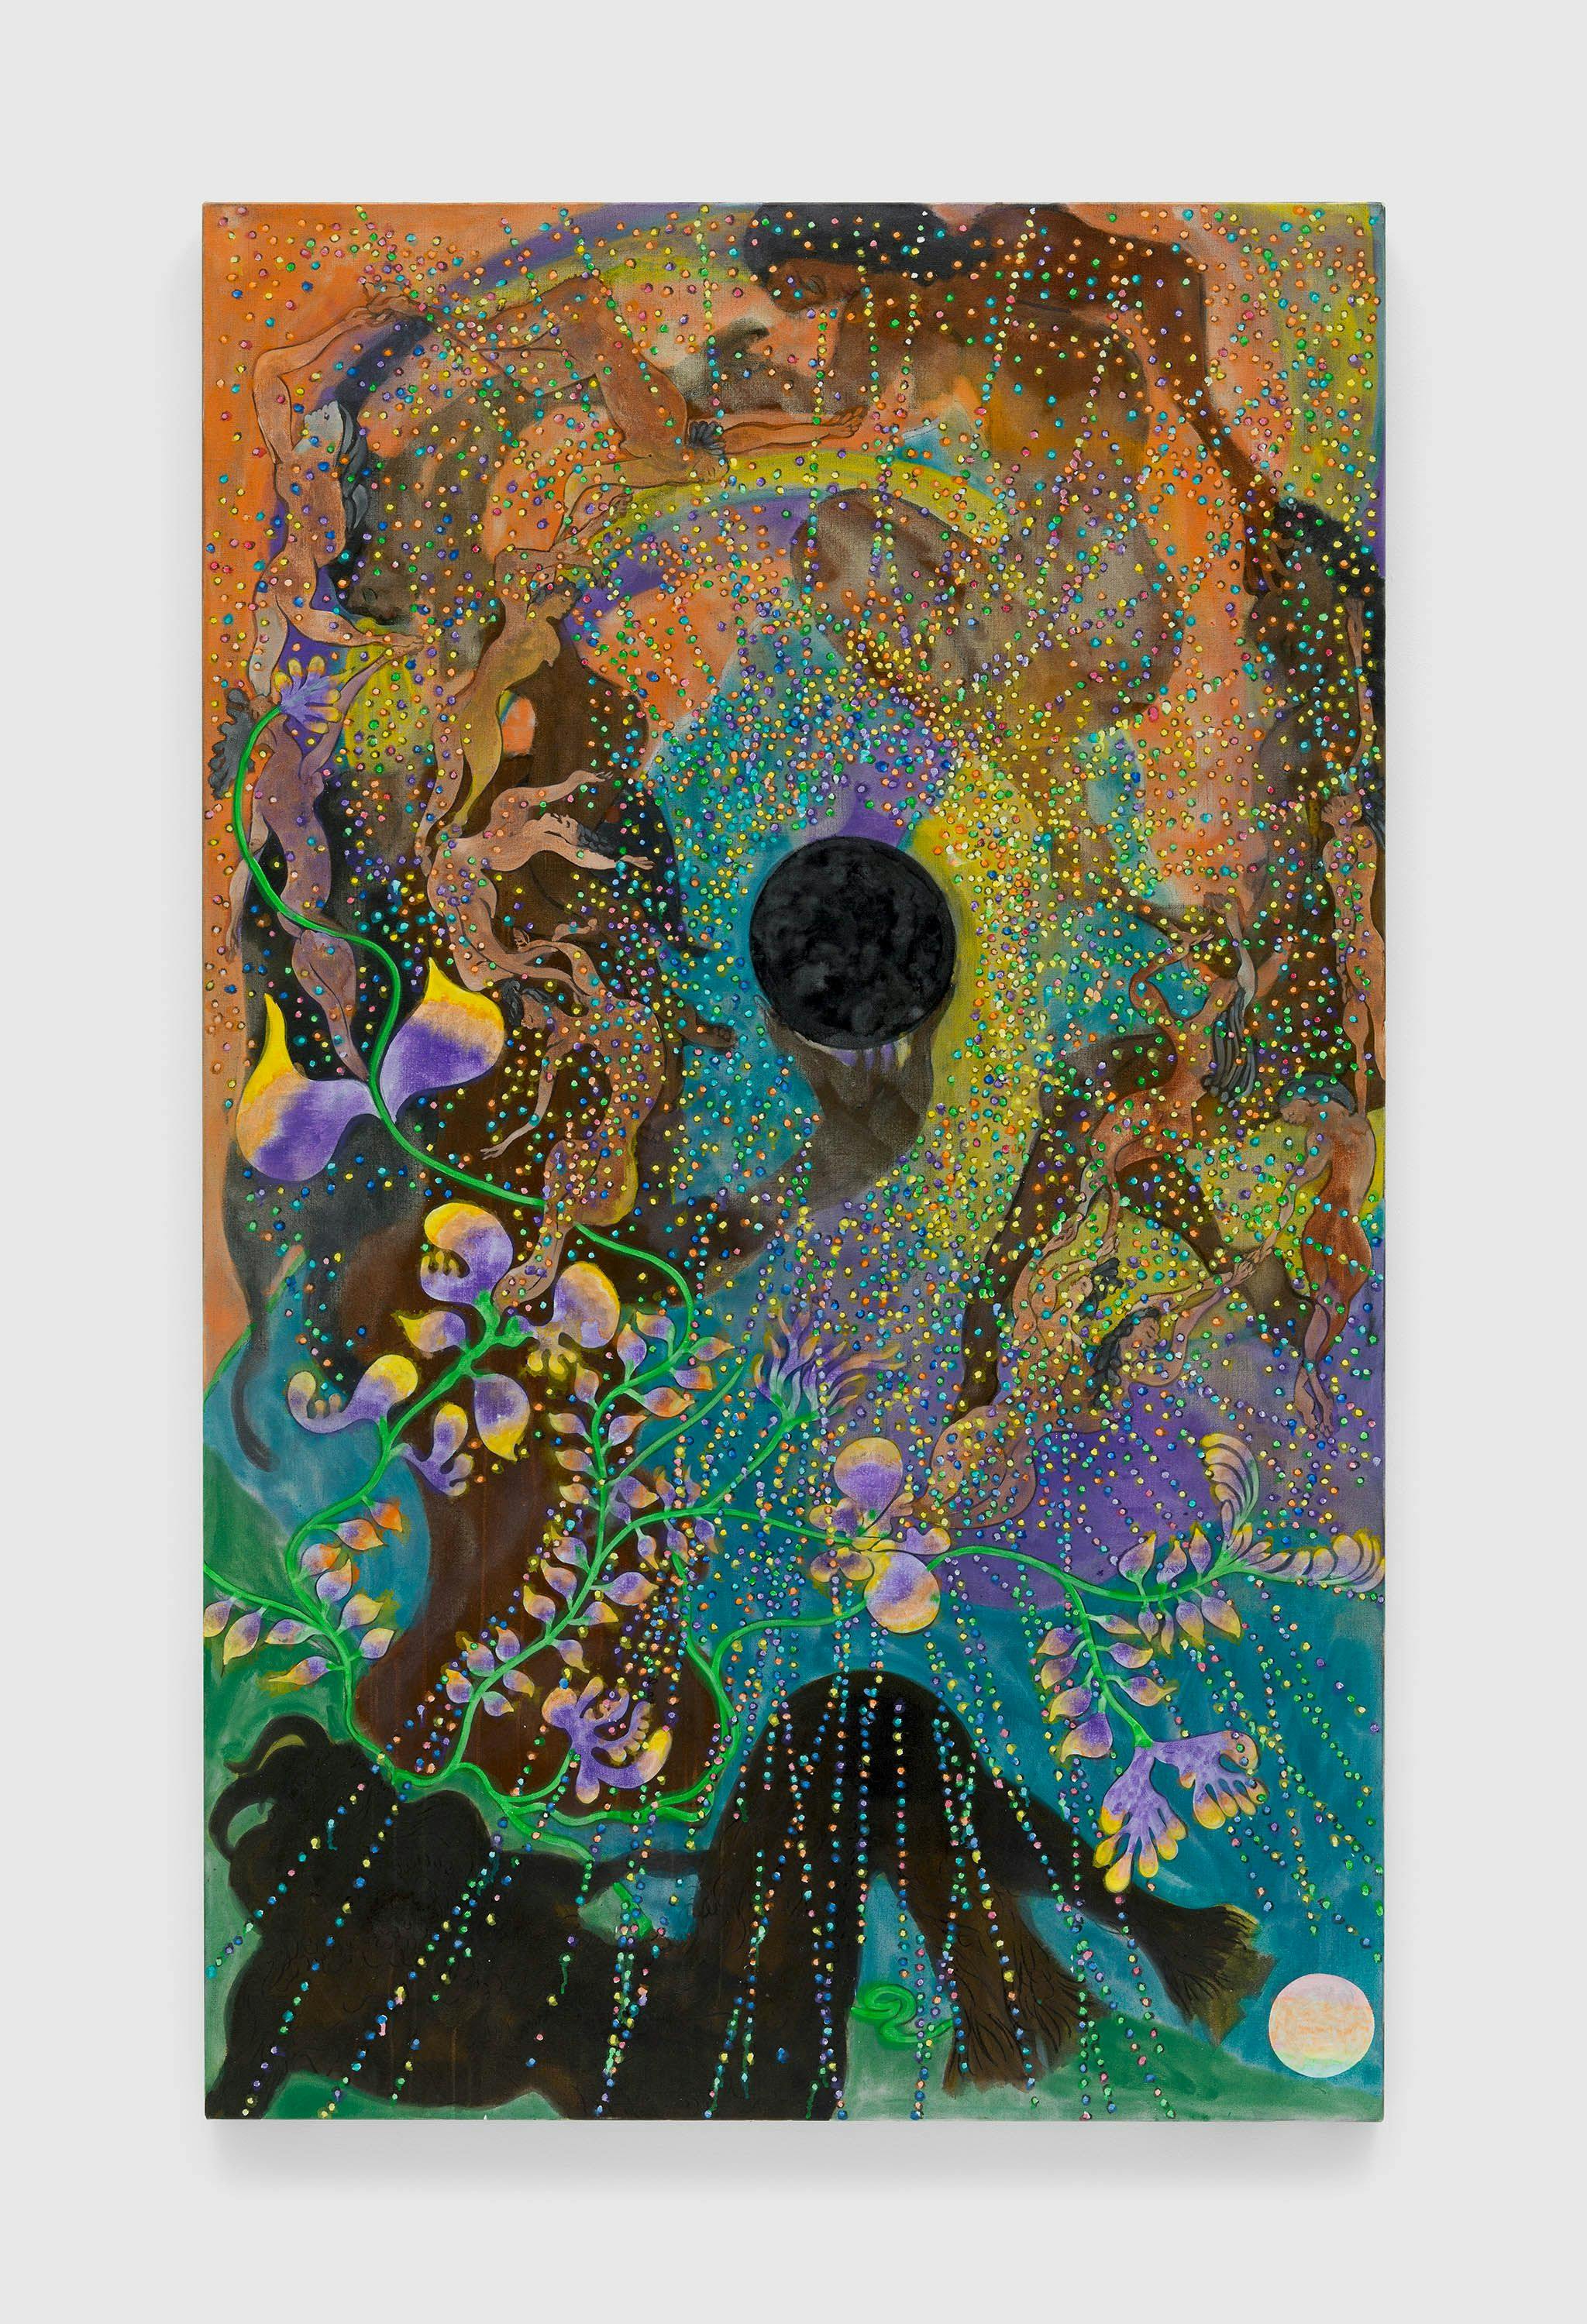 A painting by Chris Ofili, titled The Judgement of Paris - Black Planet, 2011 to 2023.